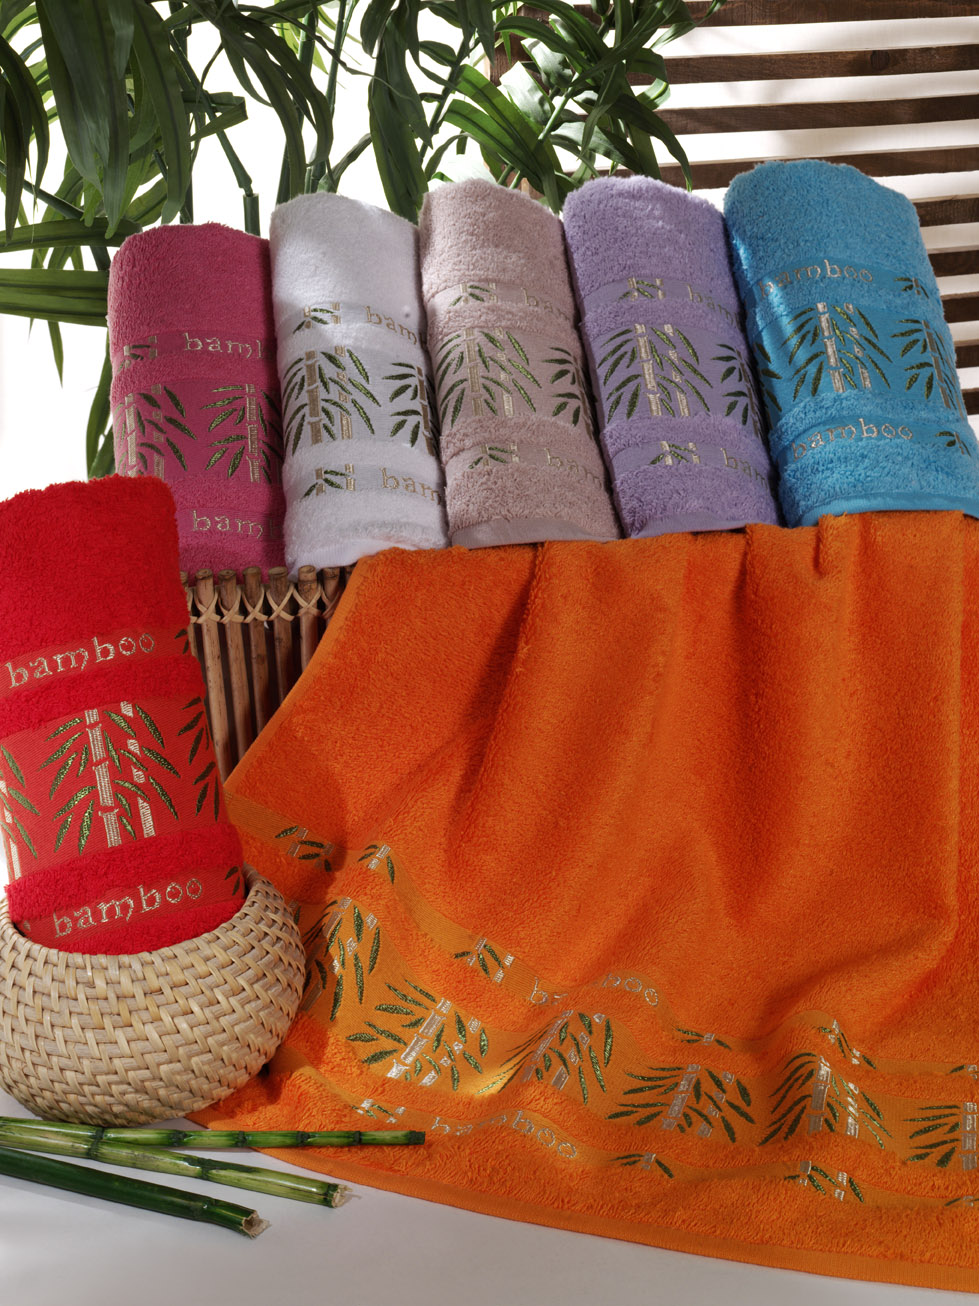 Special Towel Organic Cotton bamboo Microcotton Welsoft Mayer Lace